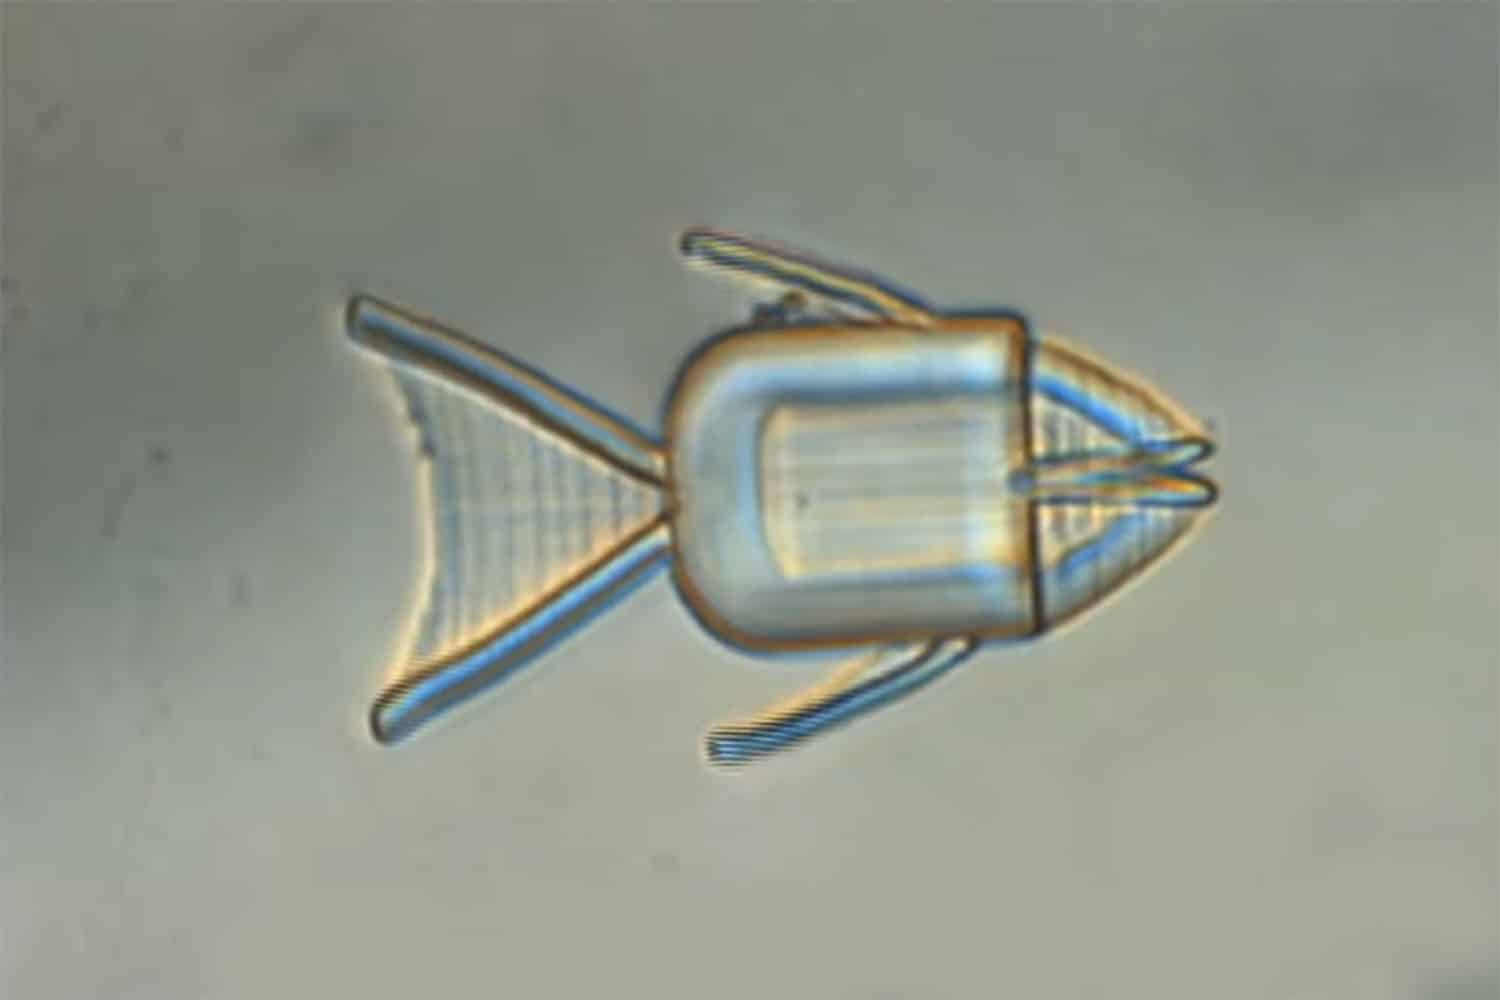 Fish-shaped microrobots for targeted drug delivery to kill cancer cells.